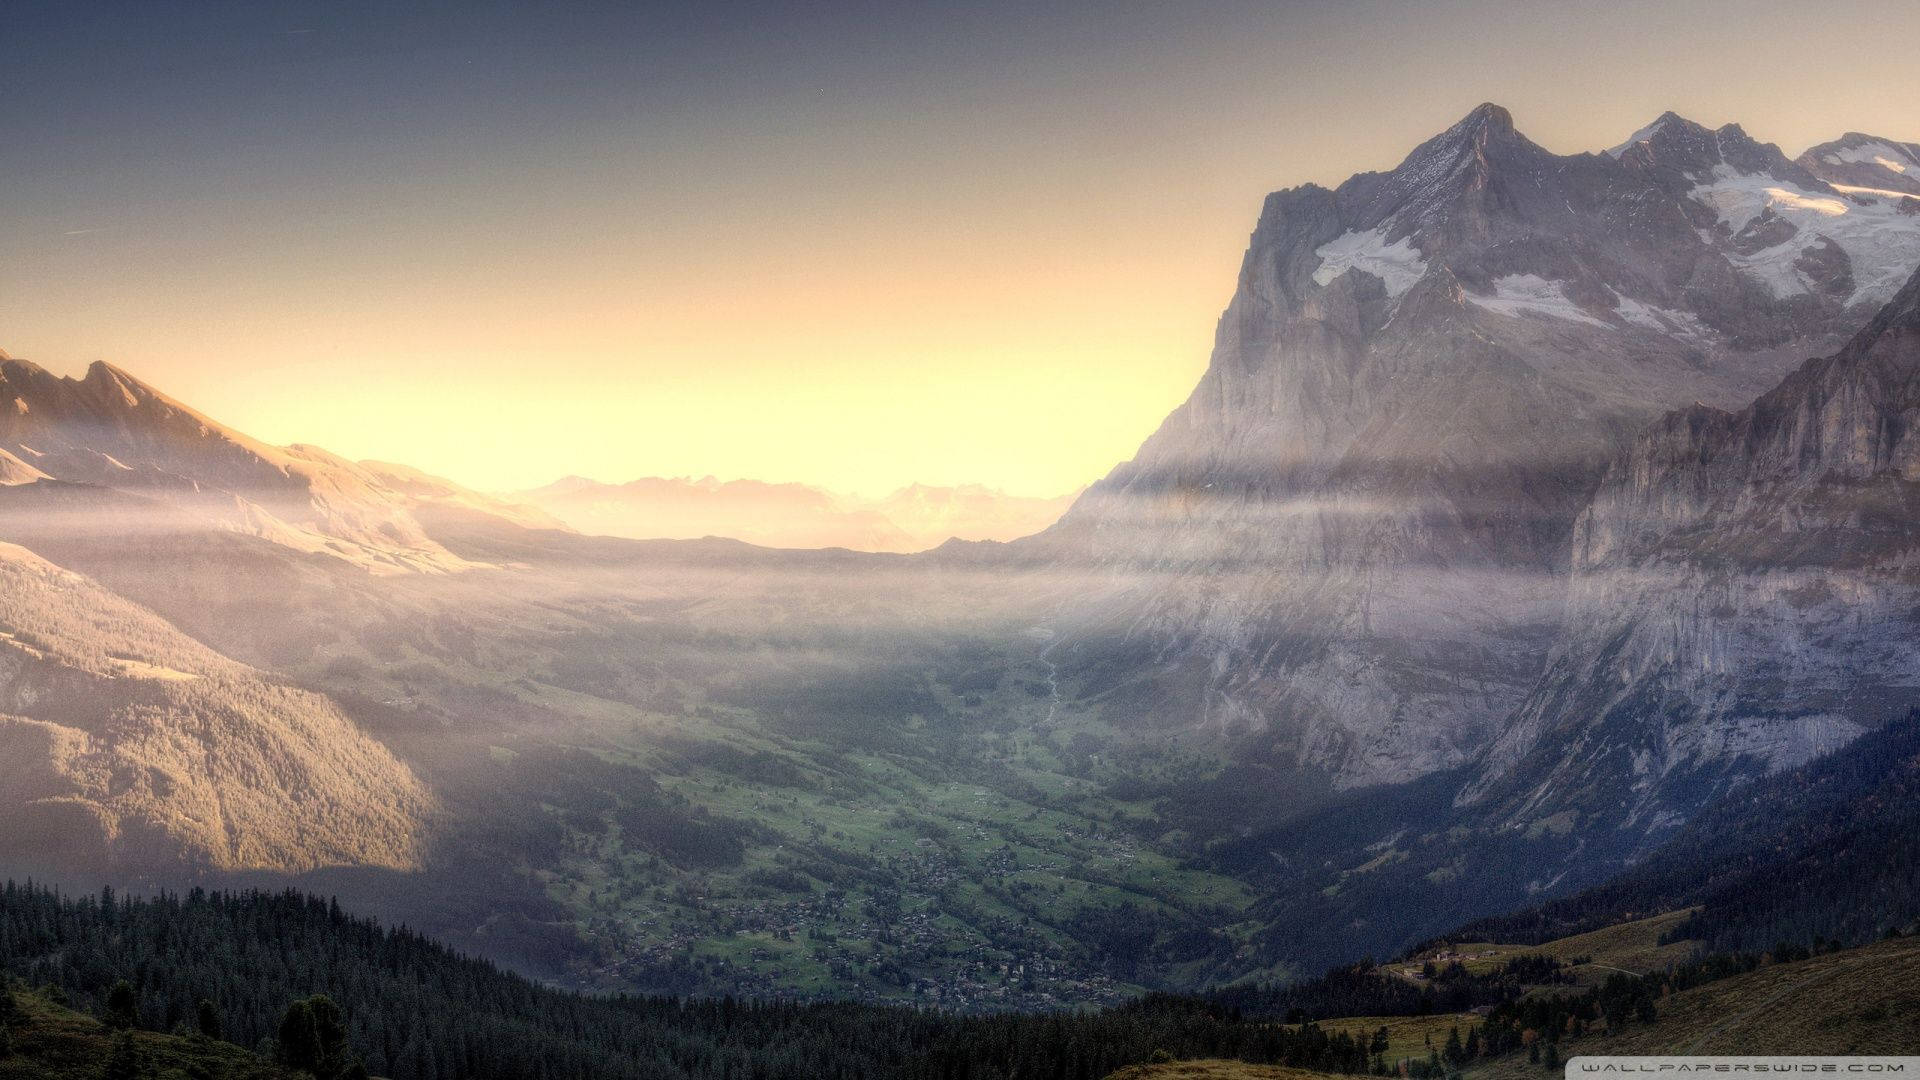 Marvel at the Beautiful Mountain View Wallpaper